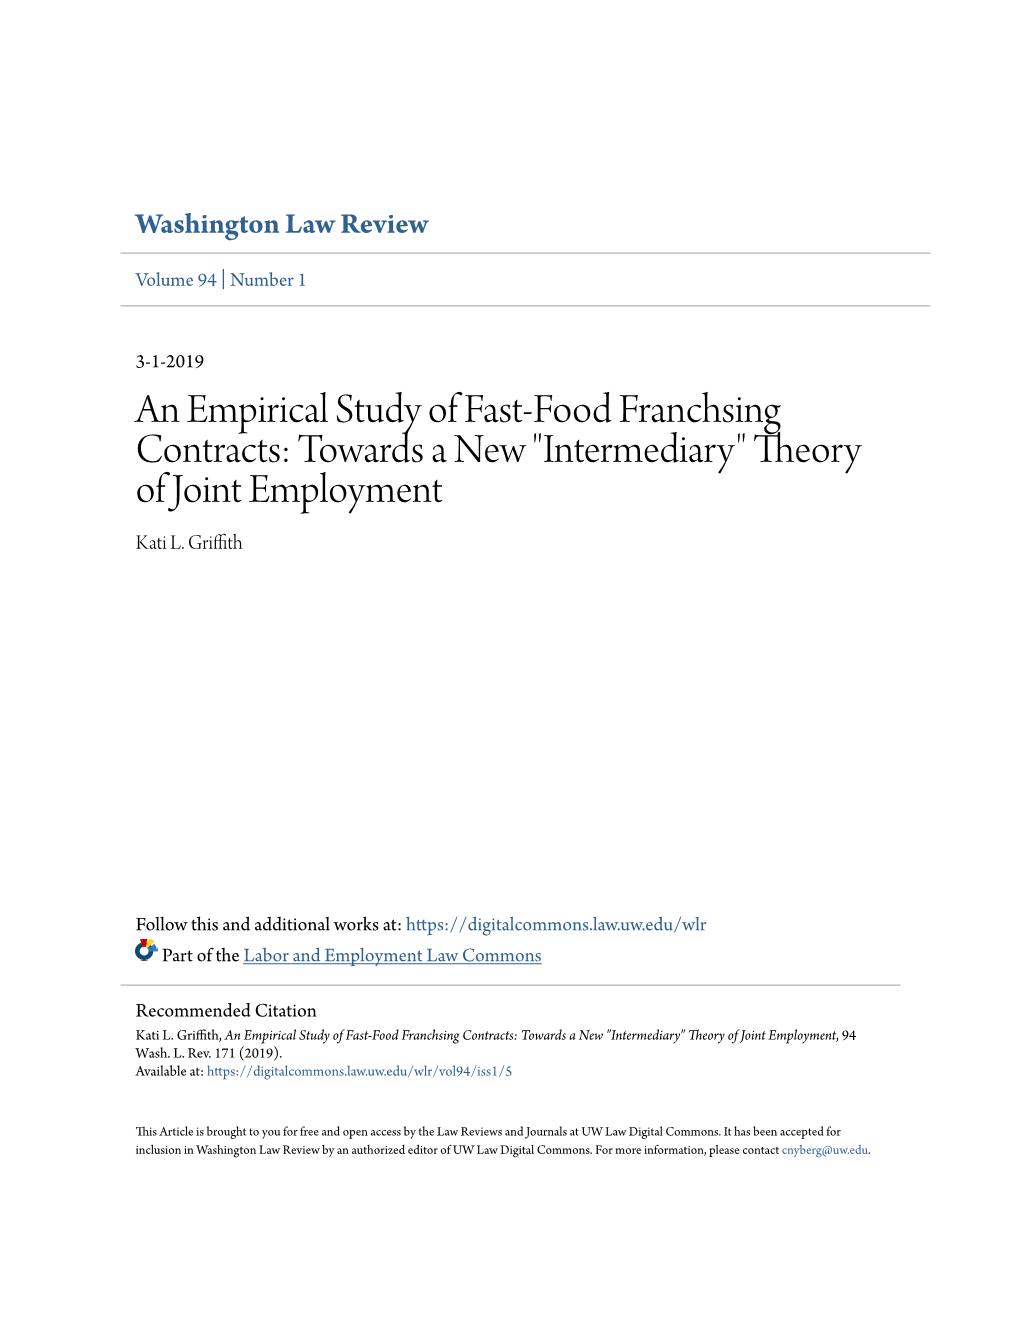 An Empirical Study of Fast-Food Franchsing Contracts: Towards a New "Intermediary" Theory of Joint Employment Kati L